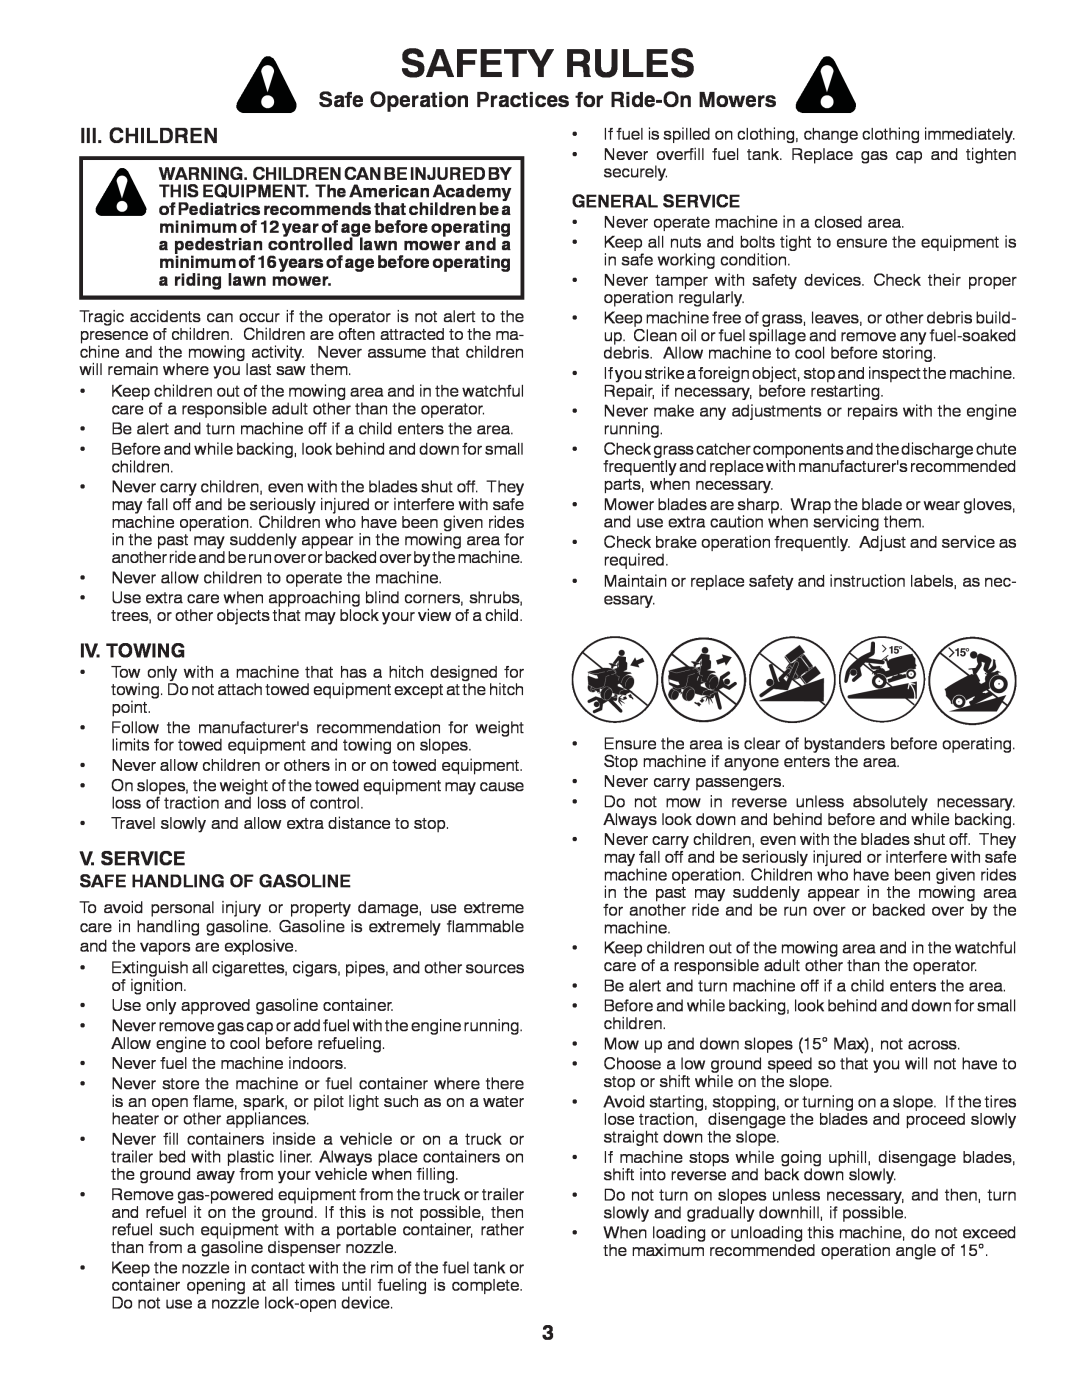 Husqvarna YTH2648TDRF Iii. Children, Safety Rules, Safe Operation Practices for Ride-On Mowers, General Service 